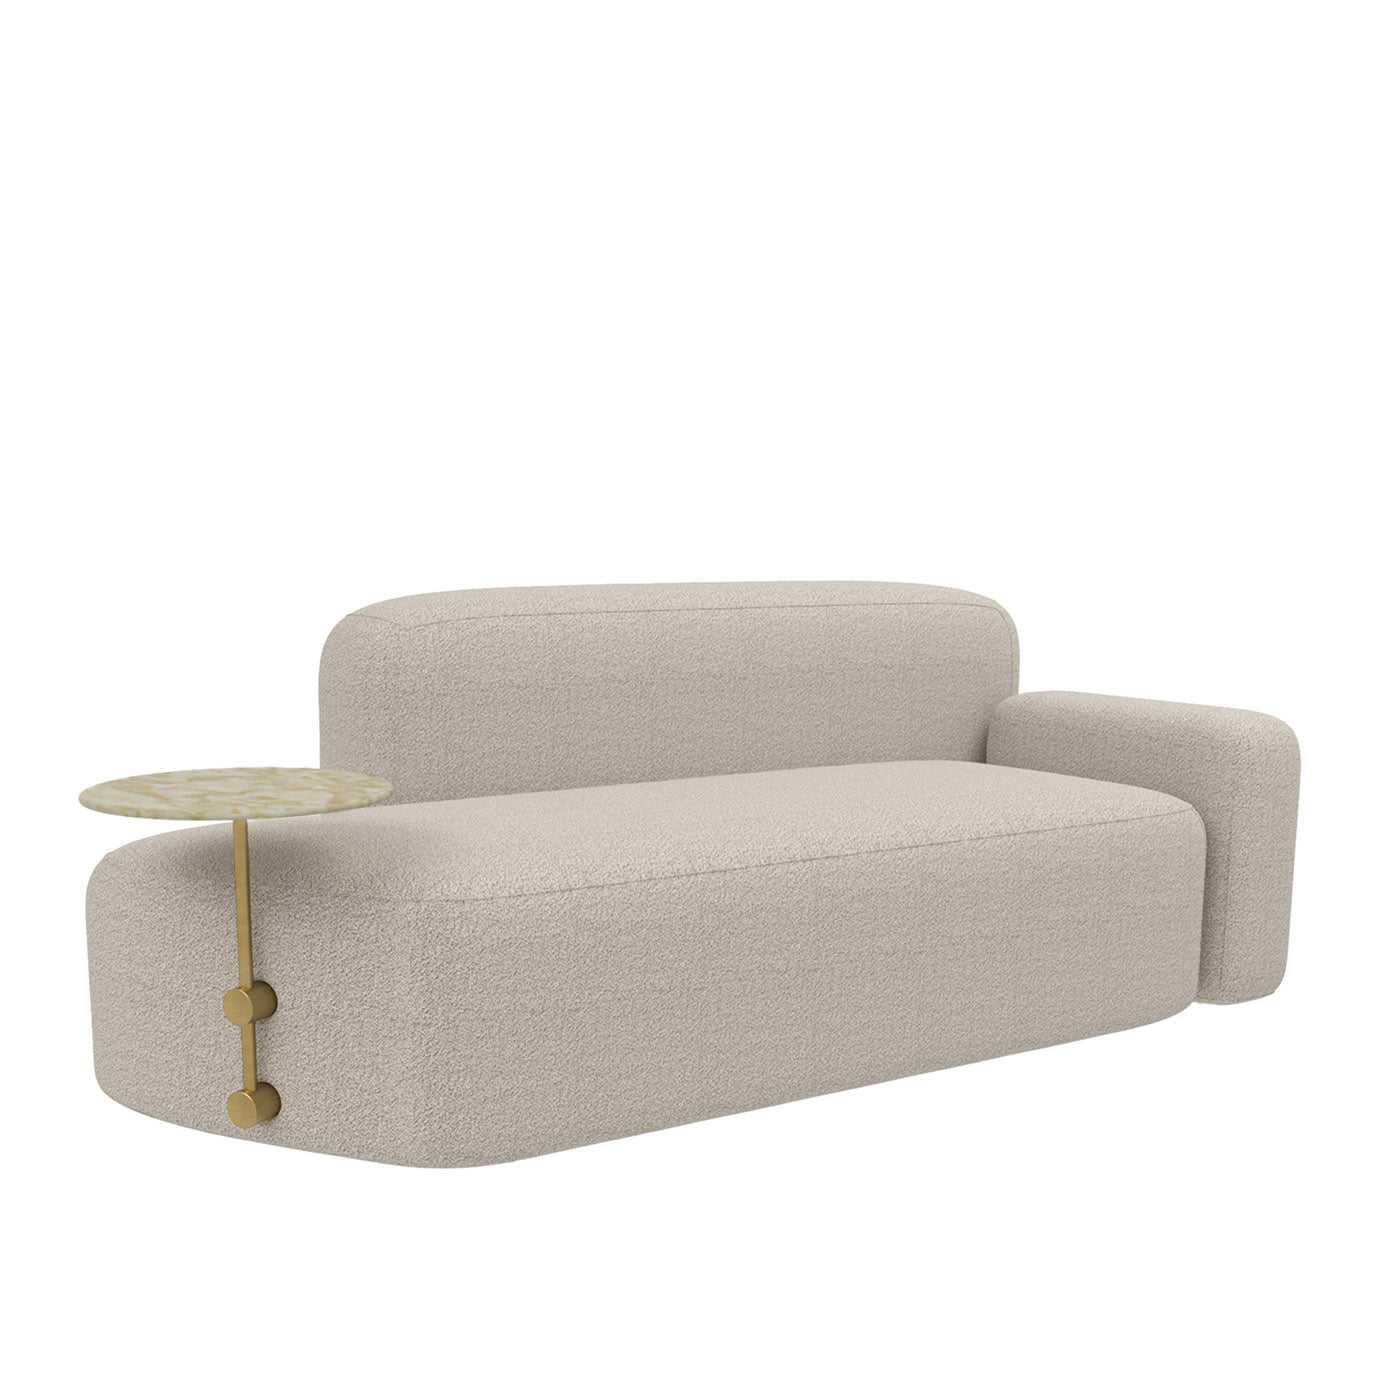 Mythos Right Sofa with Marble Side Table - Alternative view 1